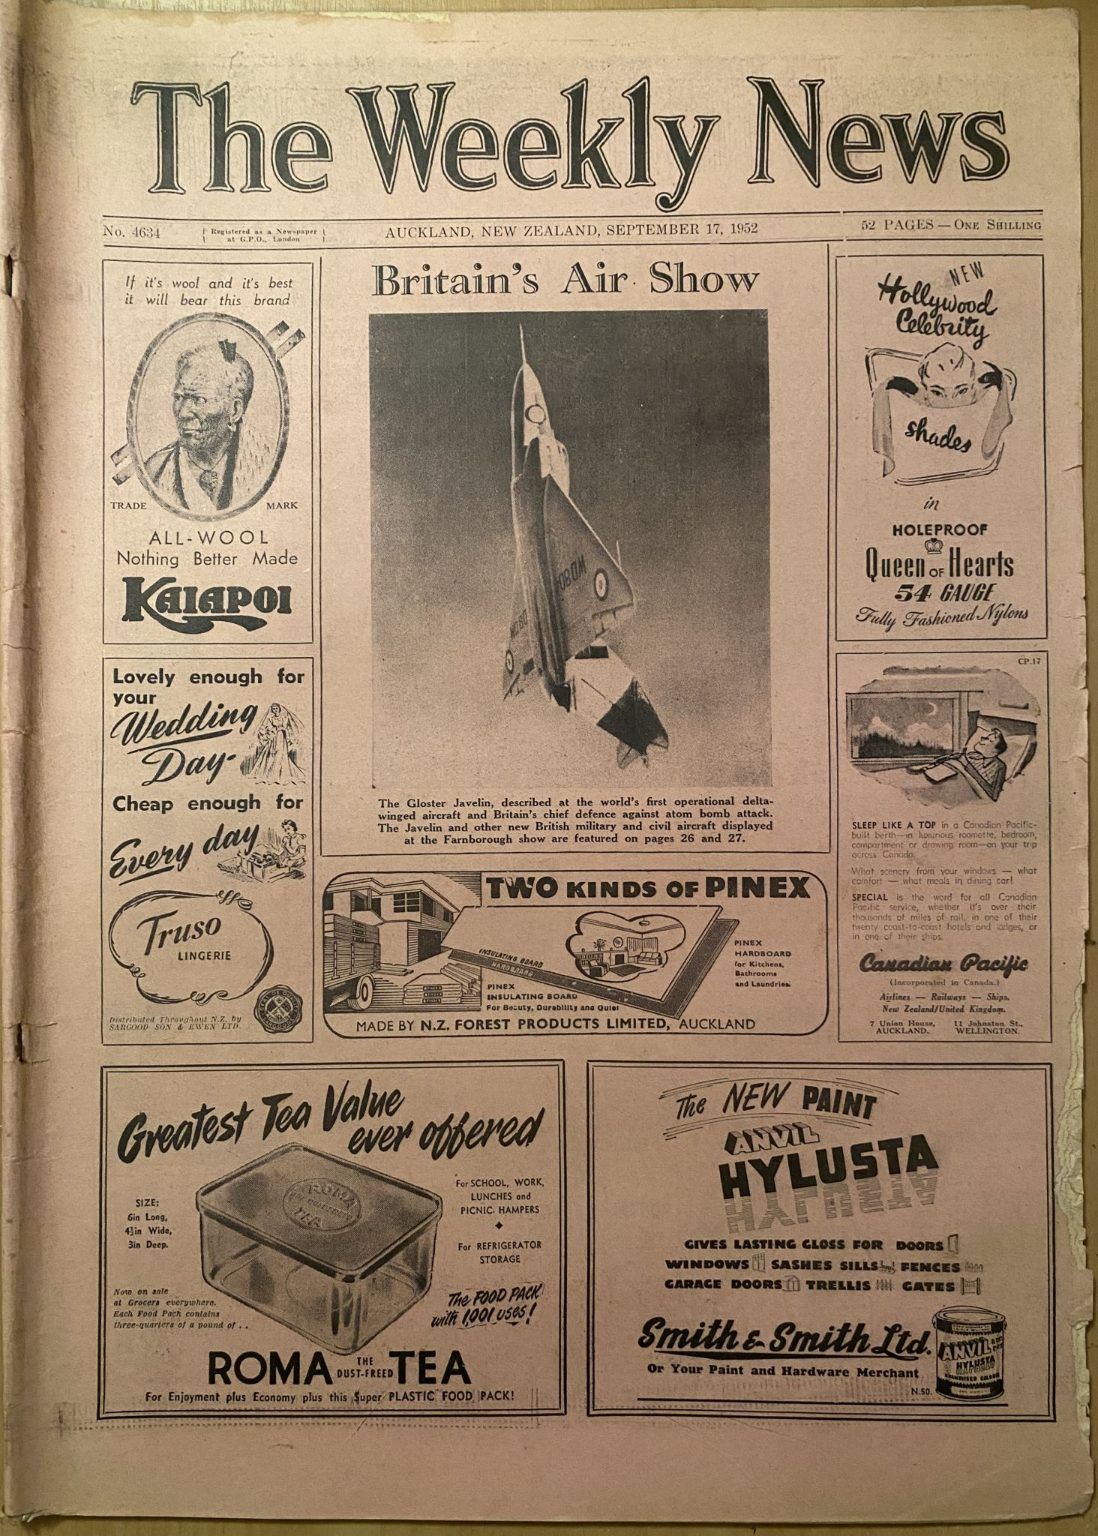 OLD NEWSPAPER: The Weekly News - No. 4634, 17 September 1952